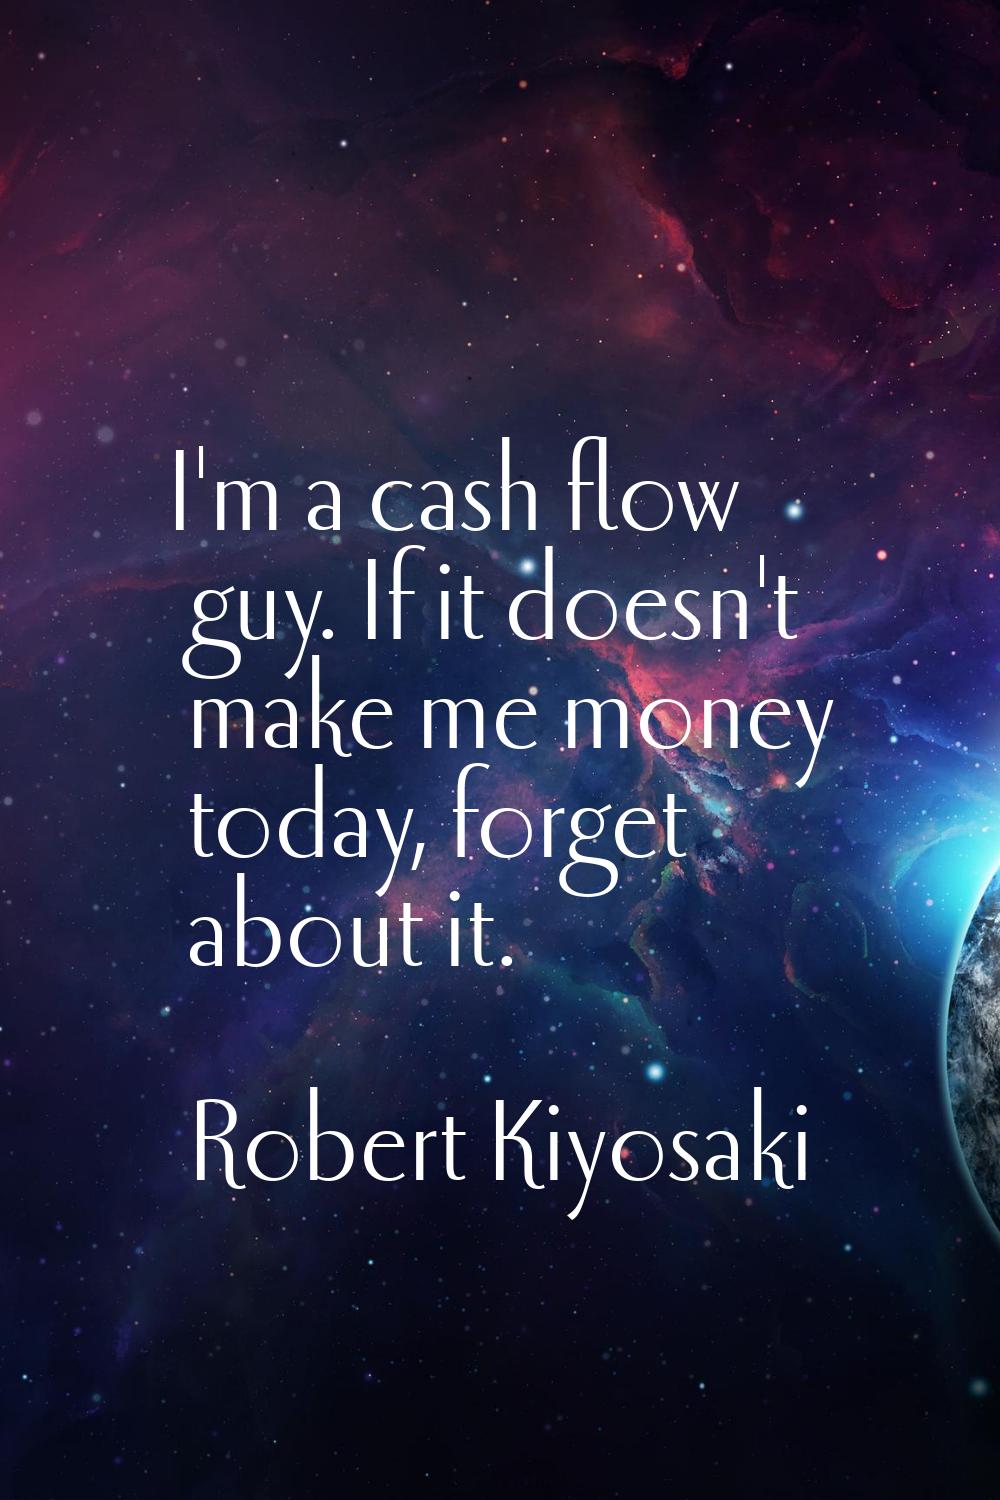 I'm a cash flow guy. If it doesn't make me money today, forget about it.